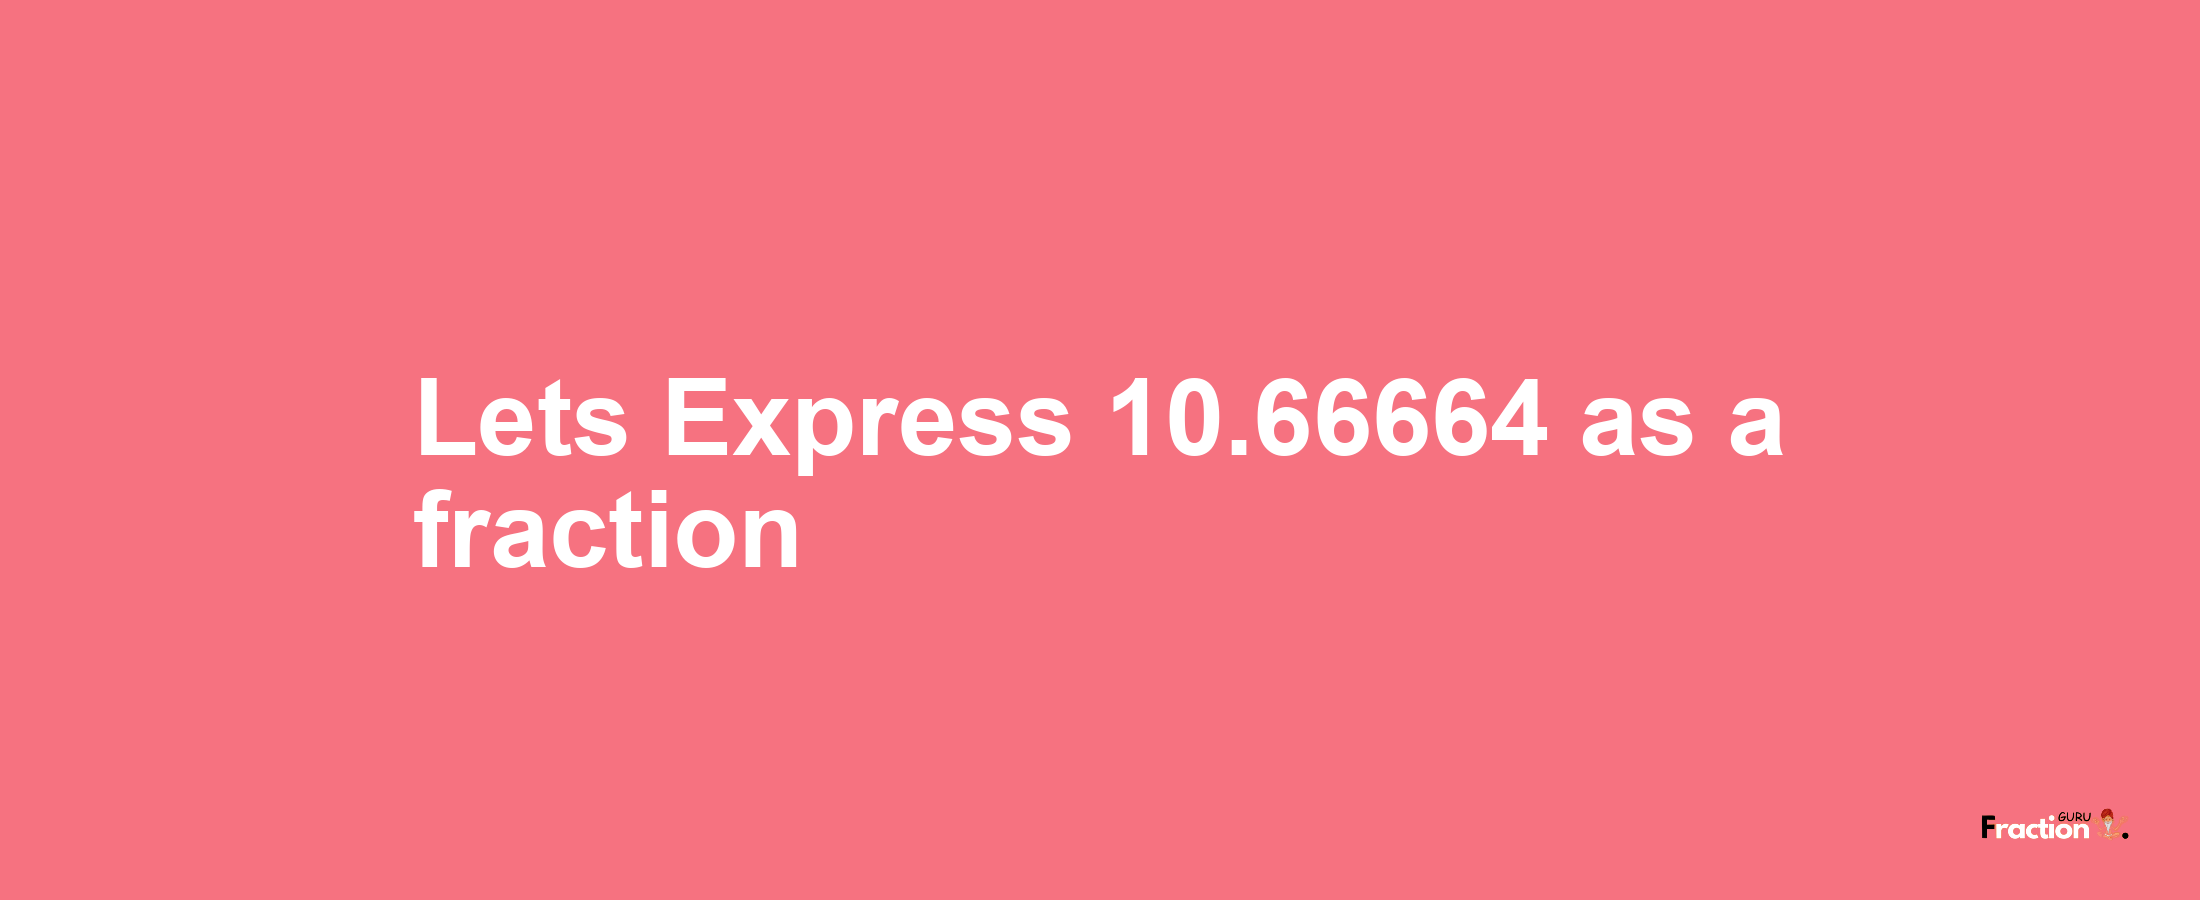 Lets Express 10.66664 as afraction